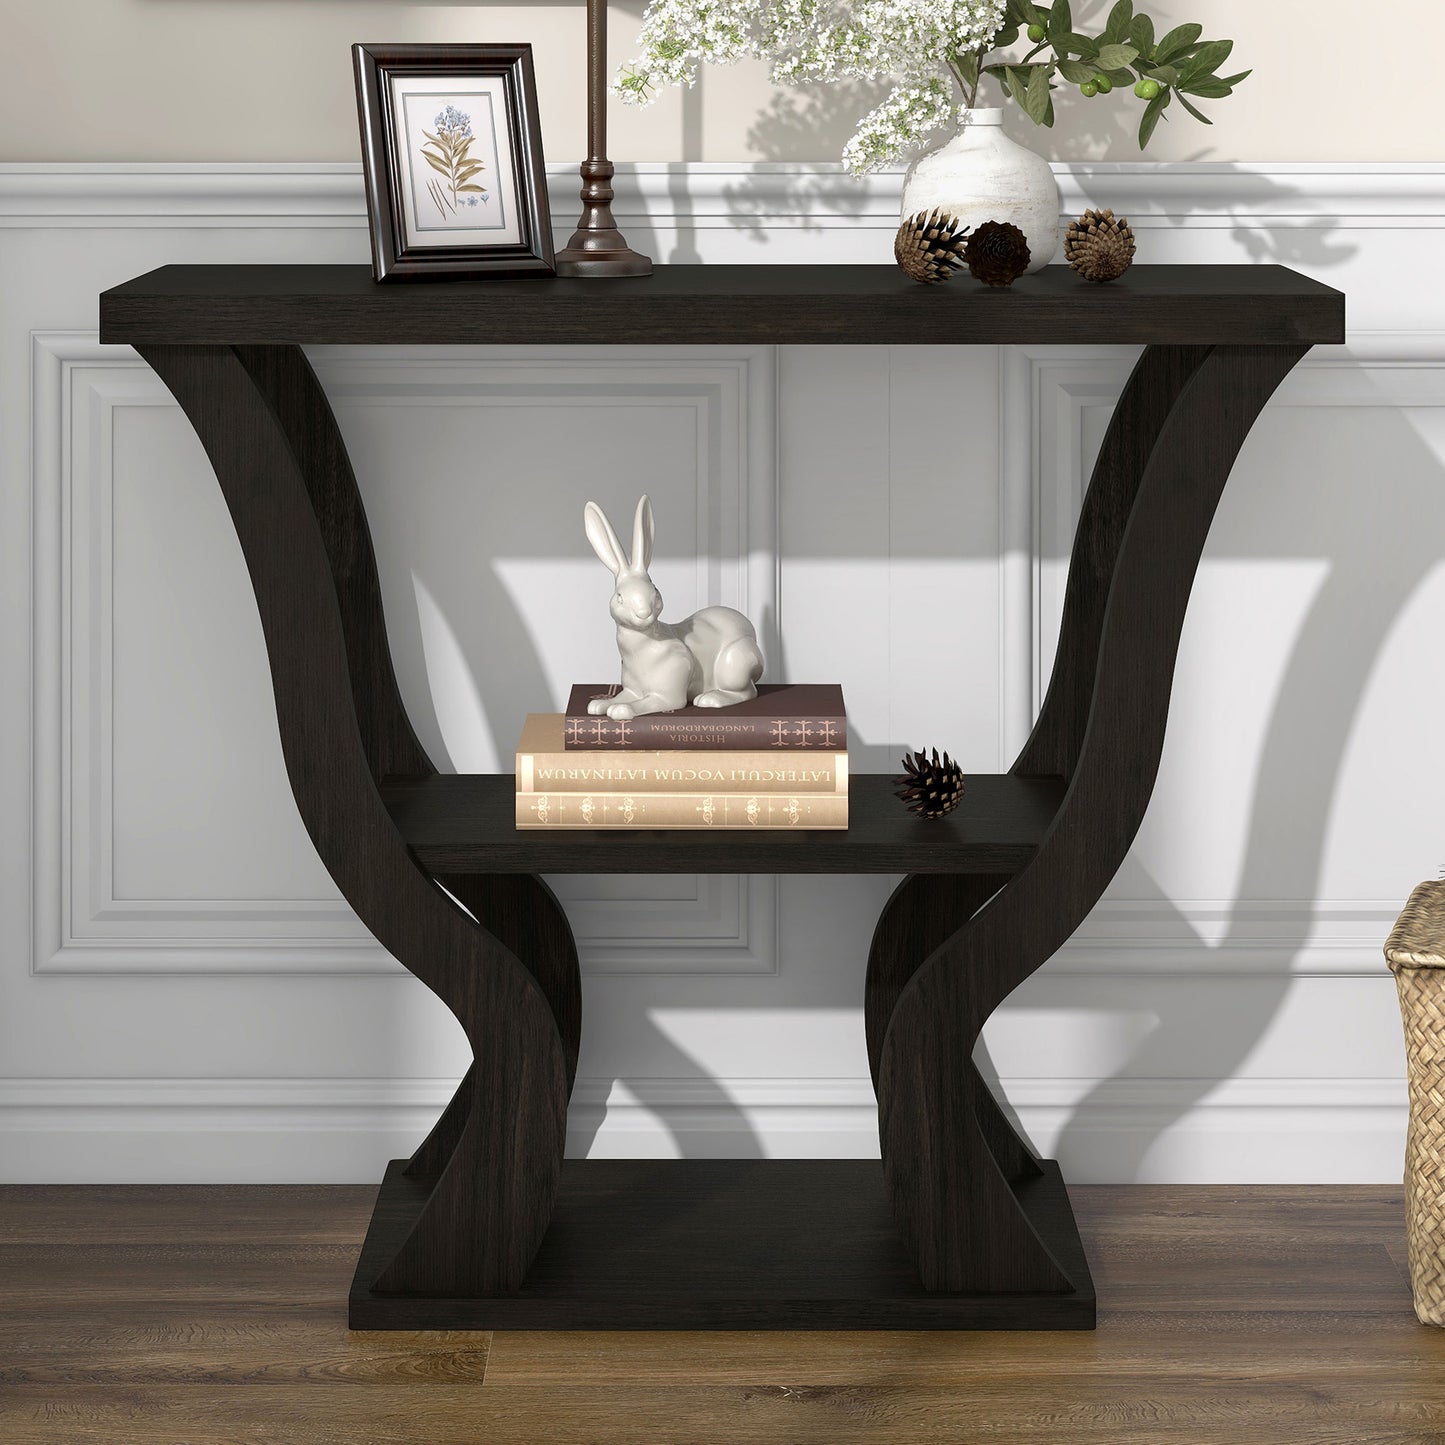 Front-facing transitional espresso curvy console table in a living area with accessories